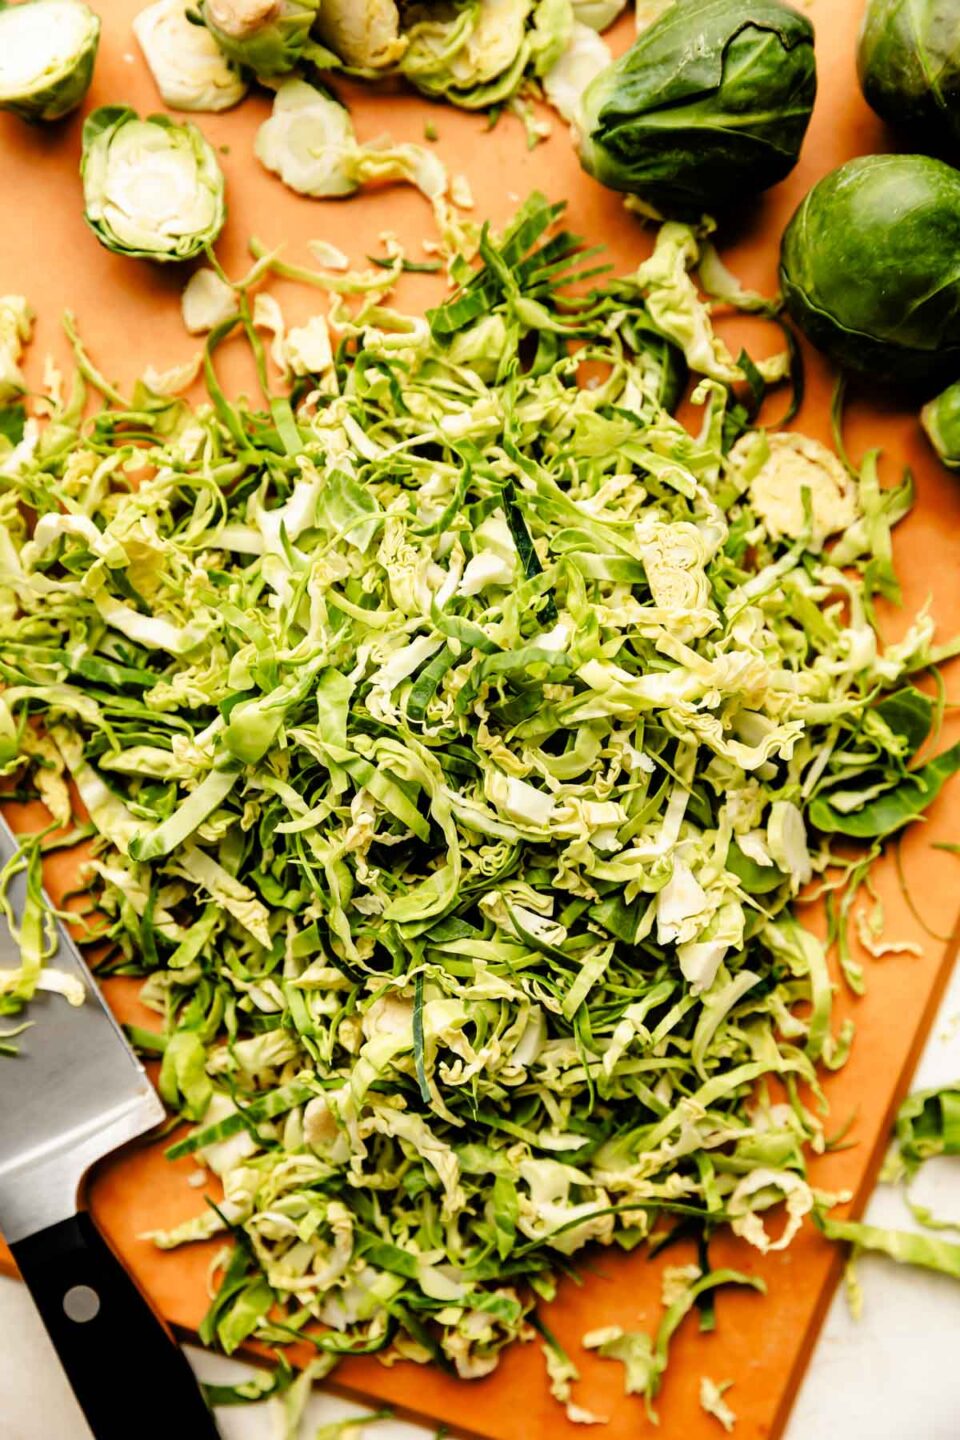 An overhead shot of shredded Brussels sprouts and whole Brussels sprouts with a chef's knife on a light brown cutting board atop an off-white surface.